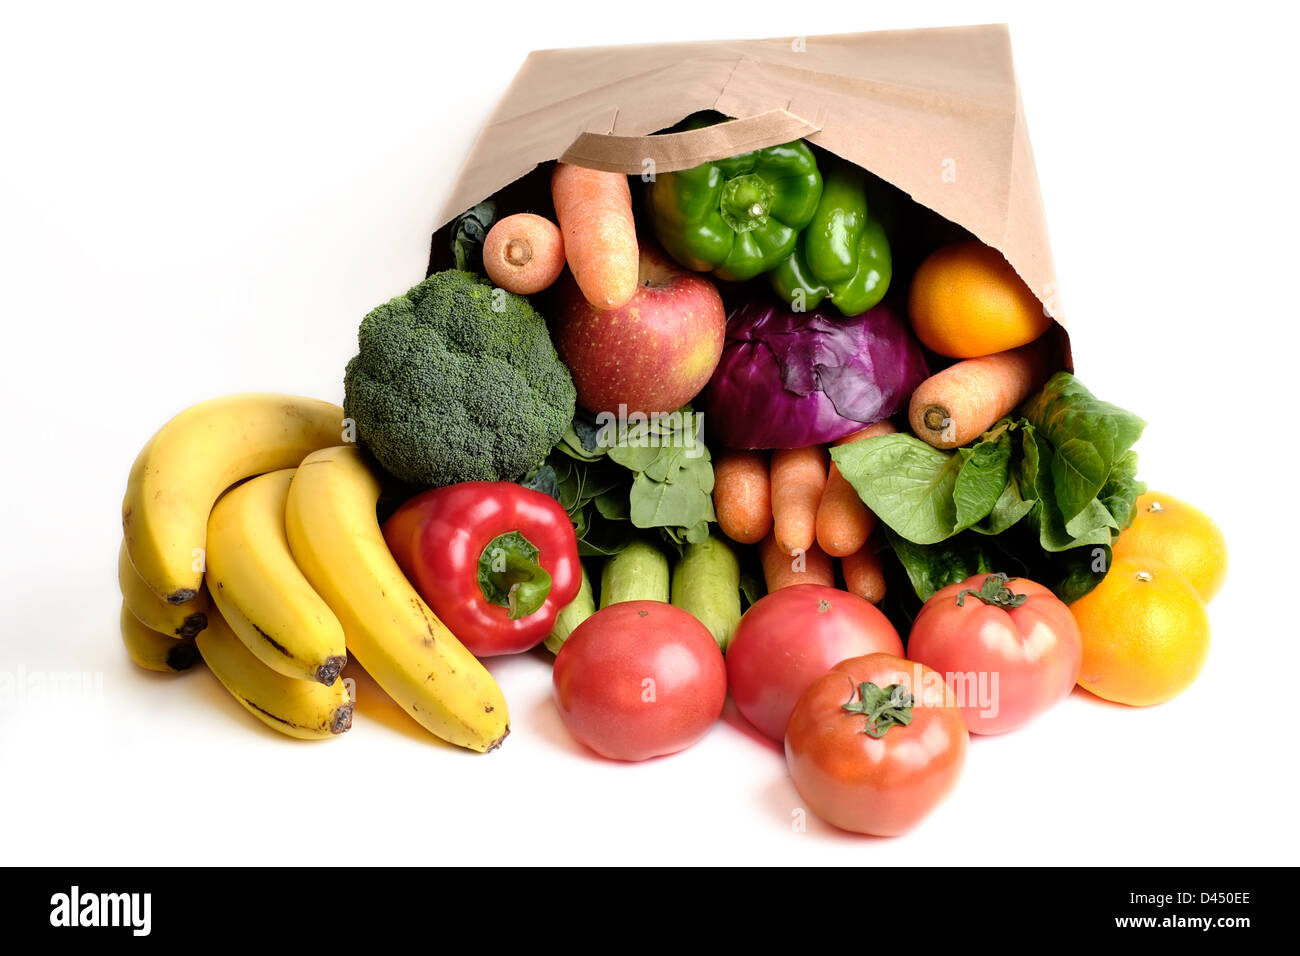 Fresh vegetables in a bag Stock Photo